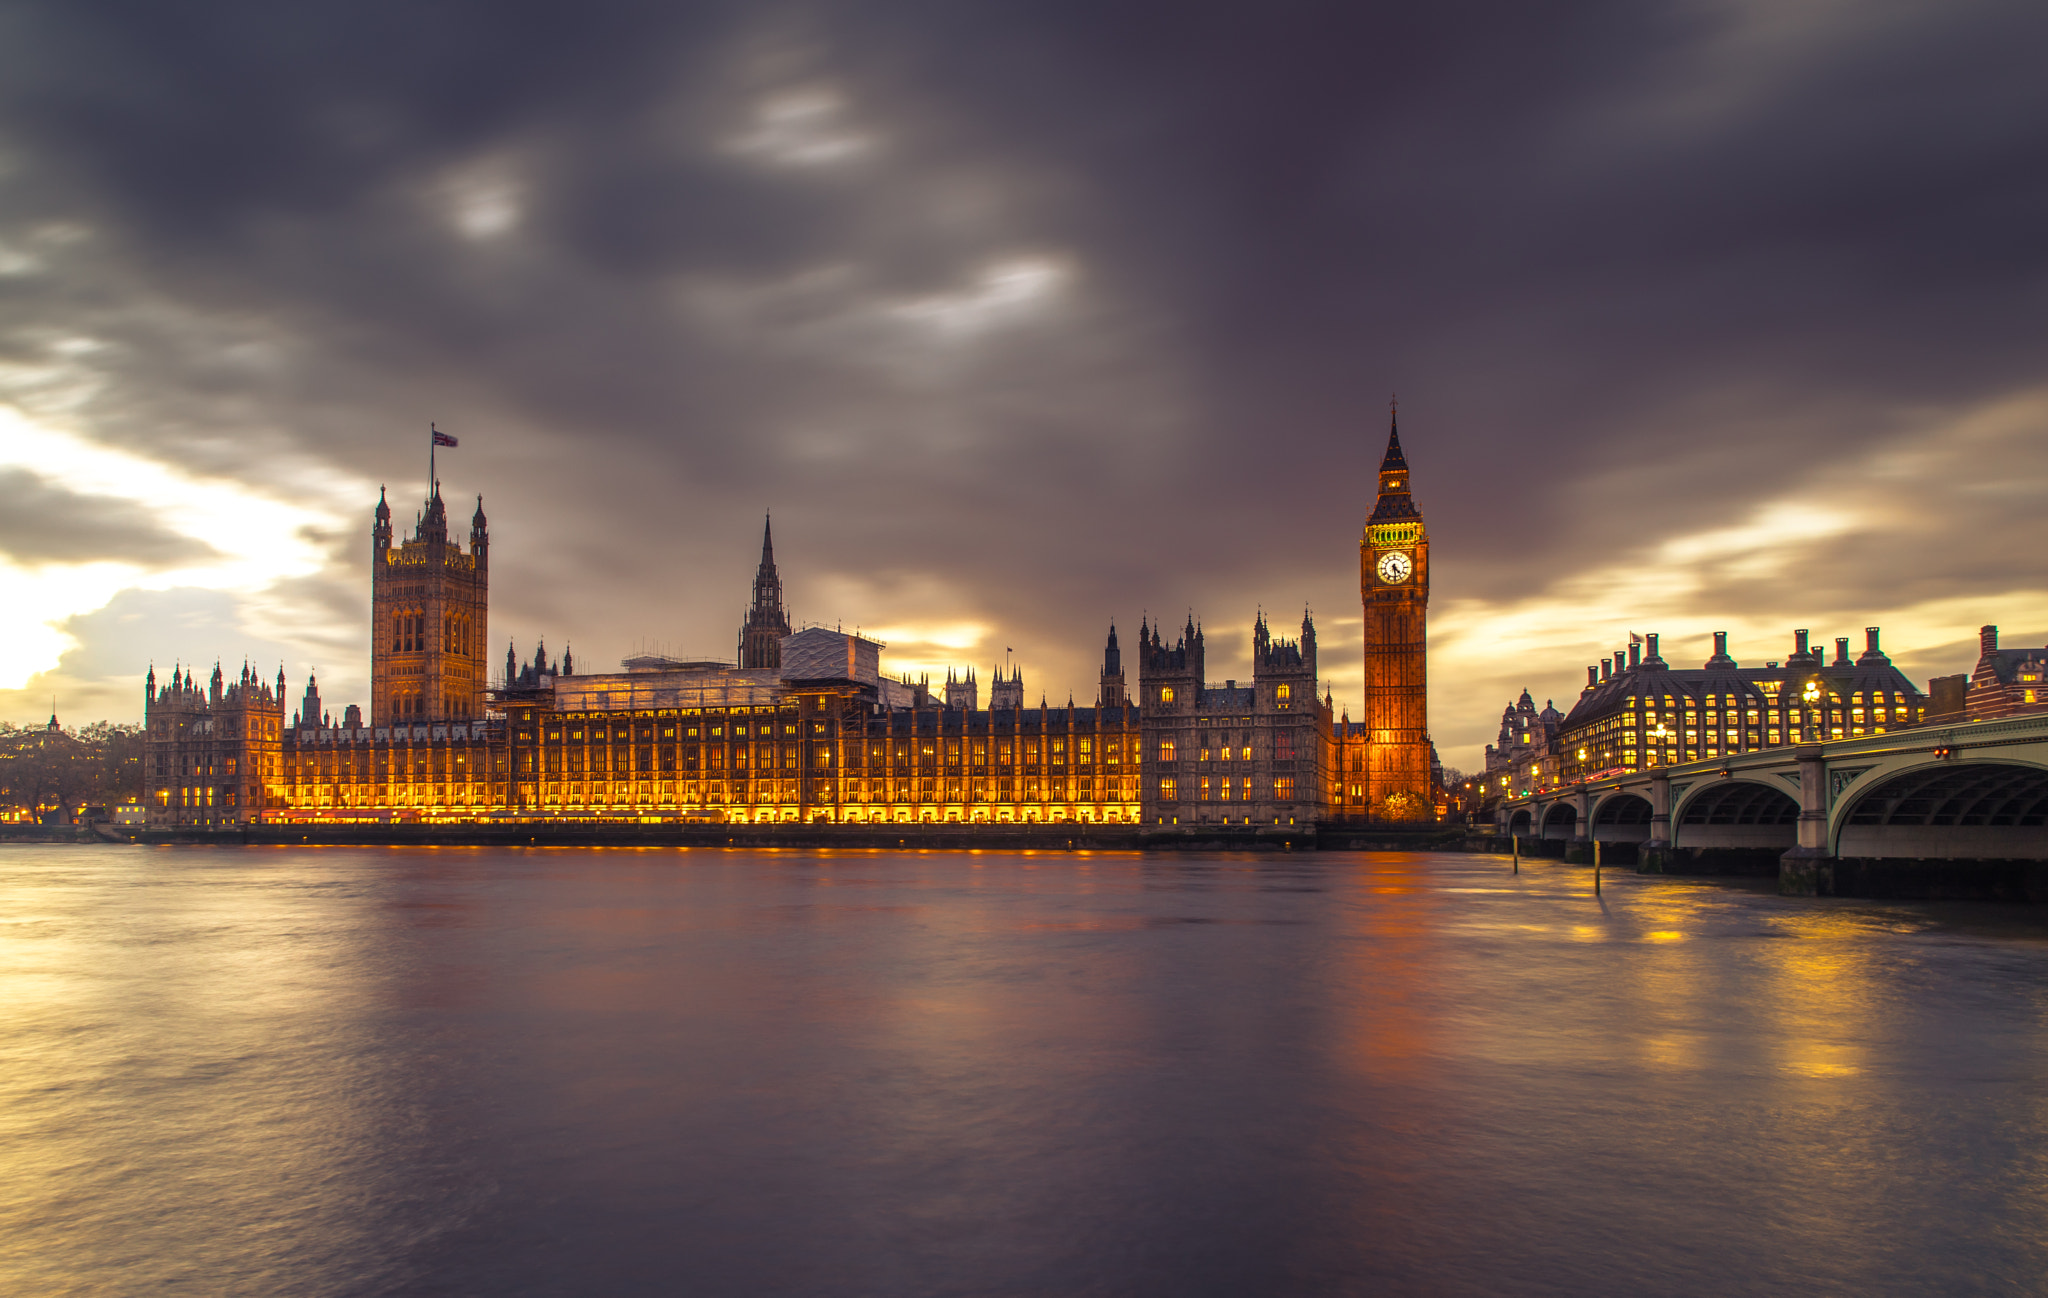 Sony a7 sample photo. Palace of westminster photography